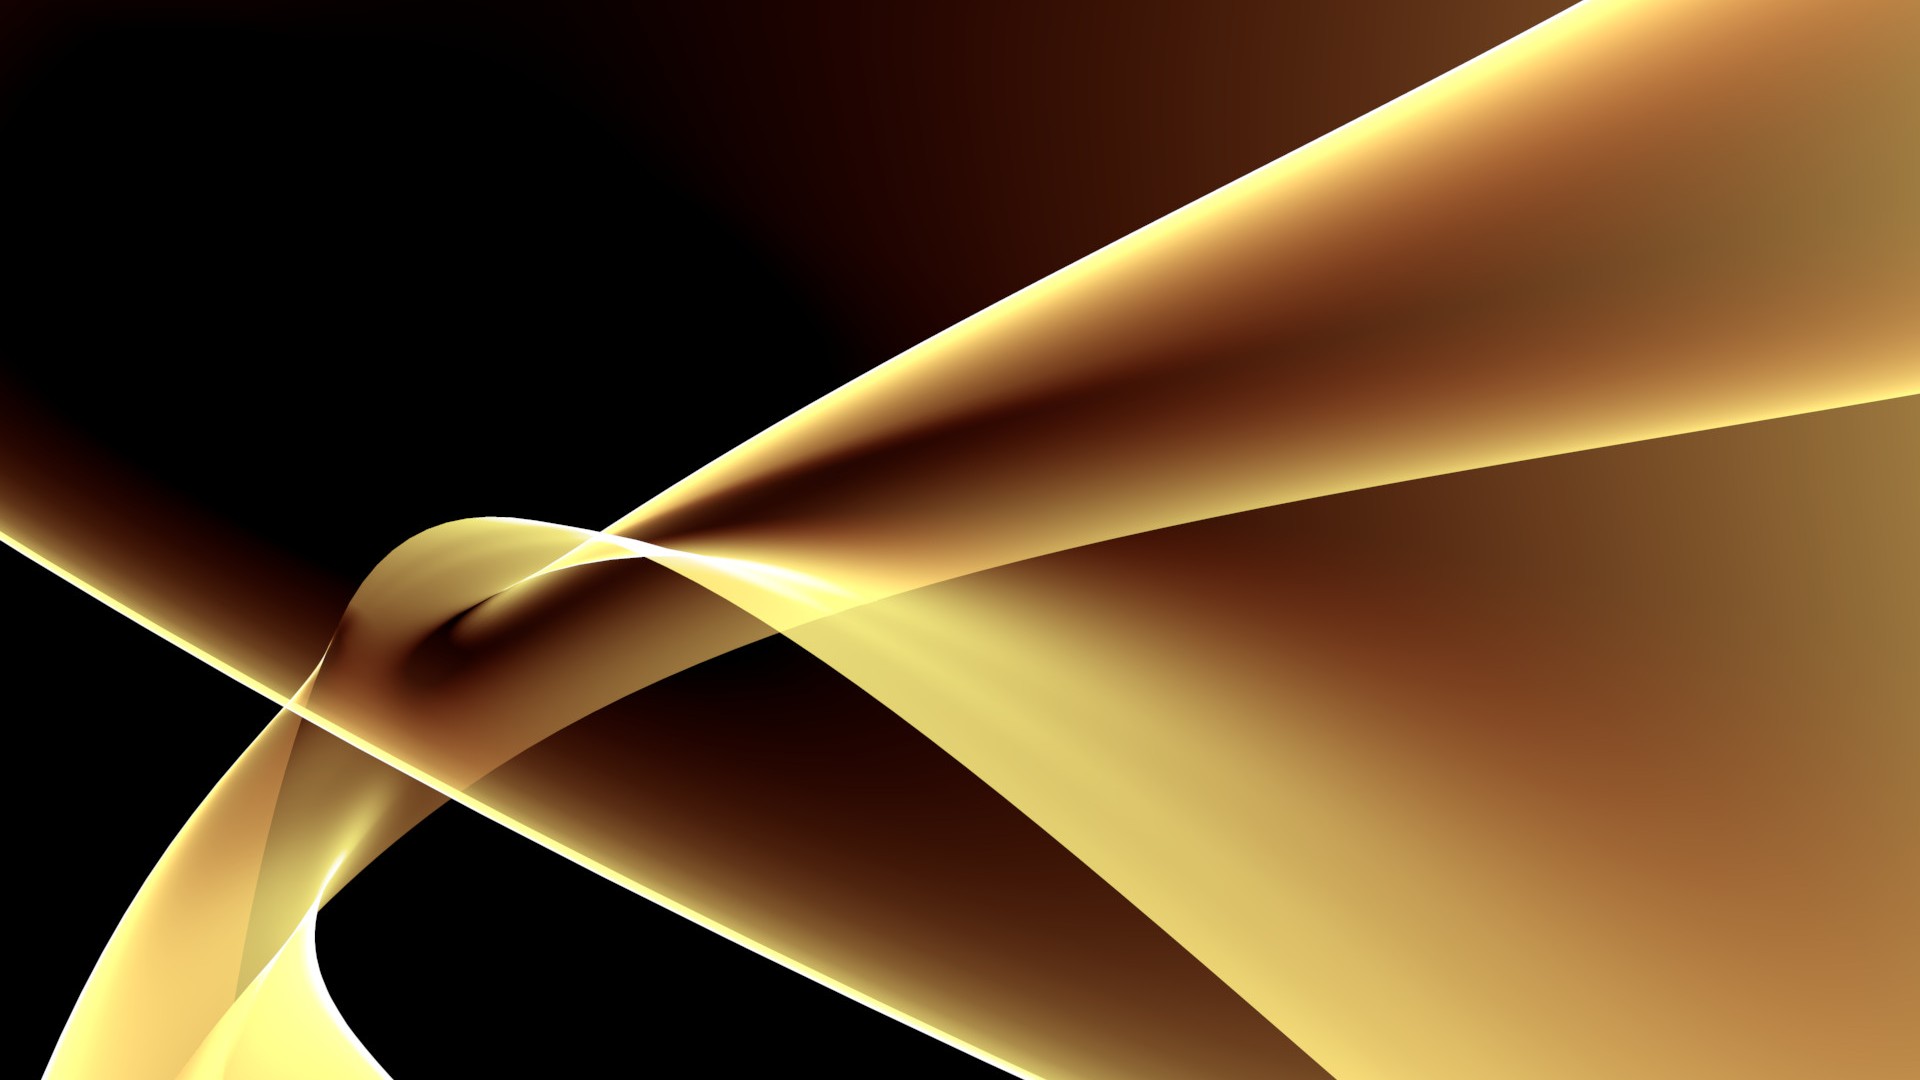 Wallpaper Black and Gold Resolution 1920x1080